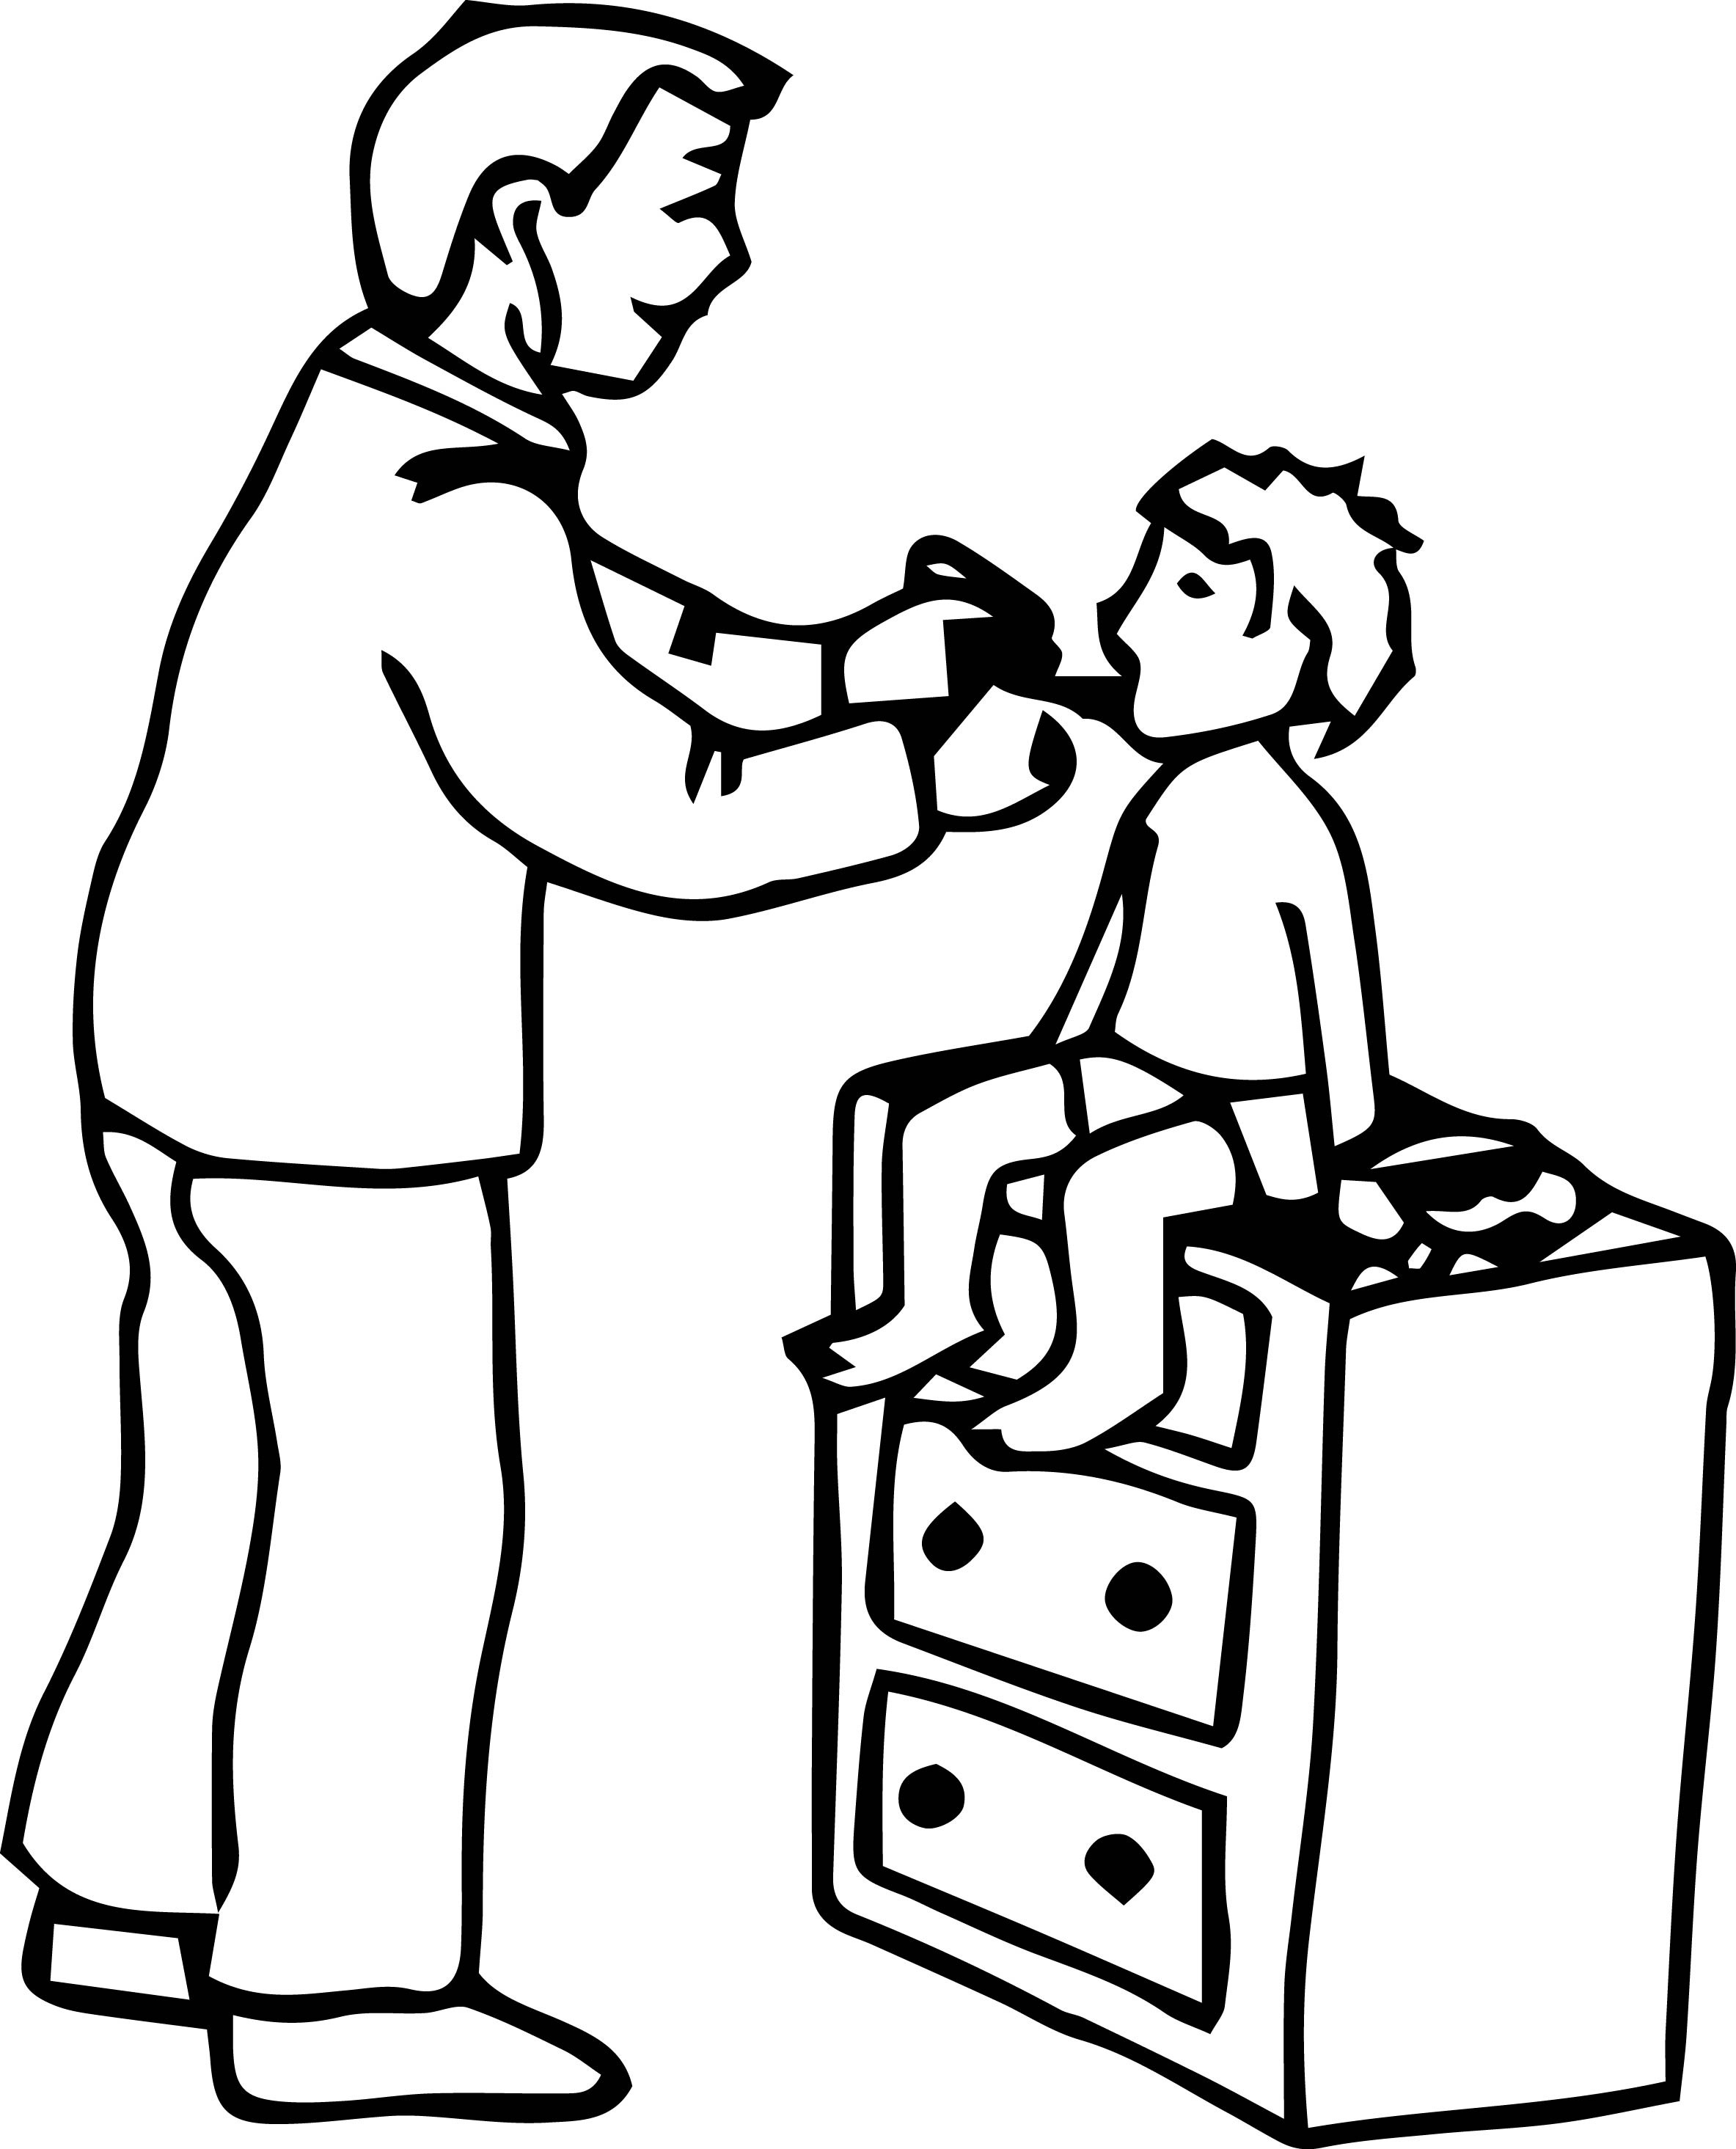 Kid doctor clipart black and white